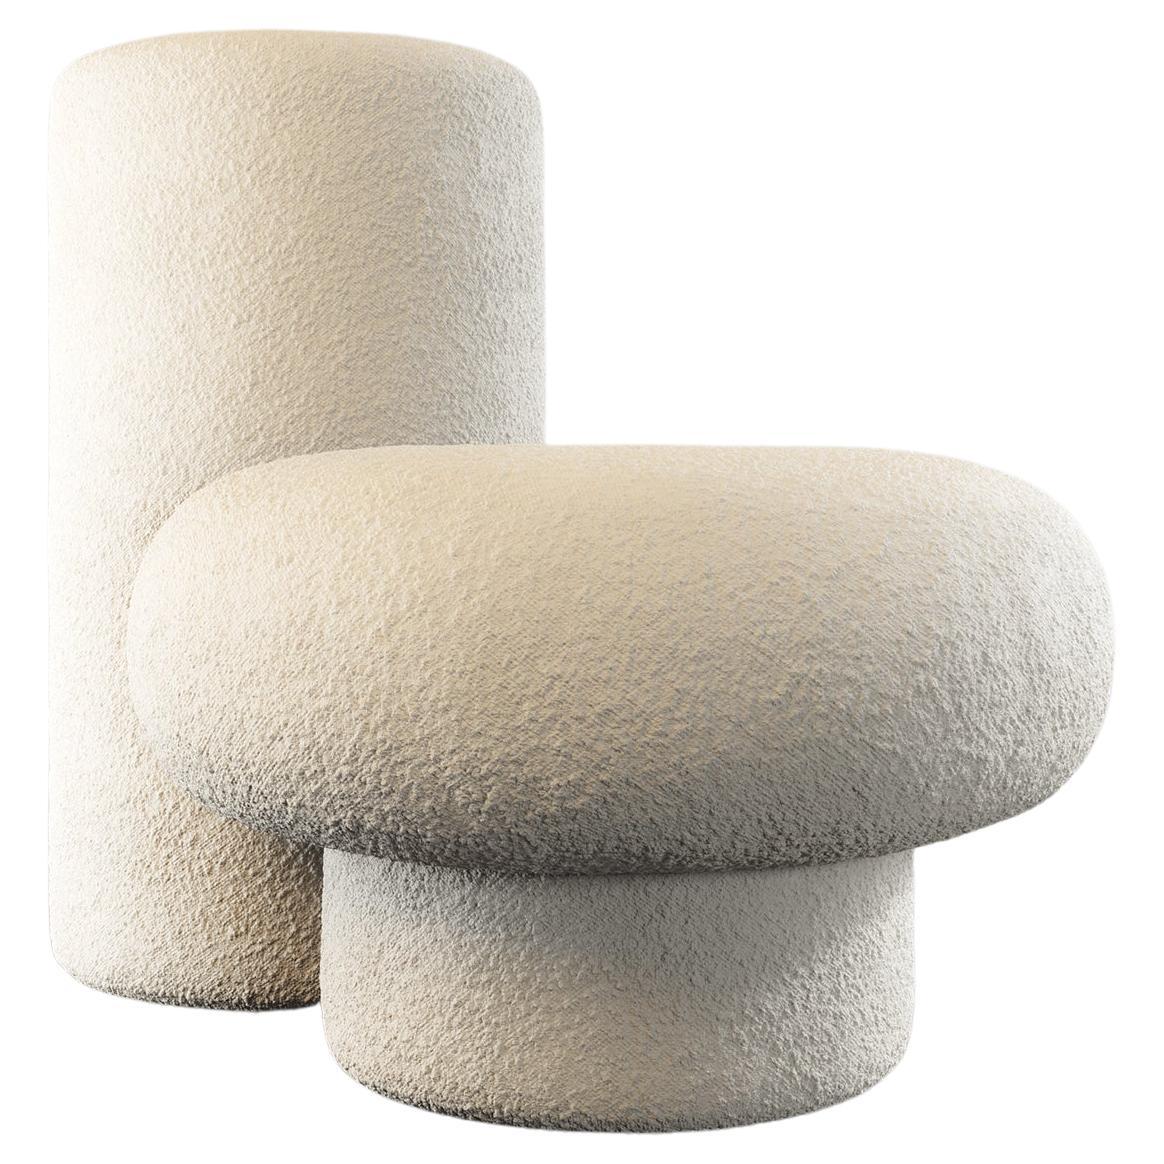 DIP CHAIR - Modern Design in Cream Nubby Bouclé

Introducing our iconic Dip Chair, a modern cream-nubby boucle chair - the perfect addition to any contemporary living room, bedroom, or office space.

Crafted with a sturdy all-wood frame and wrapped